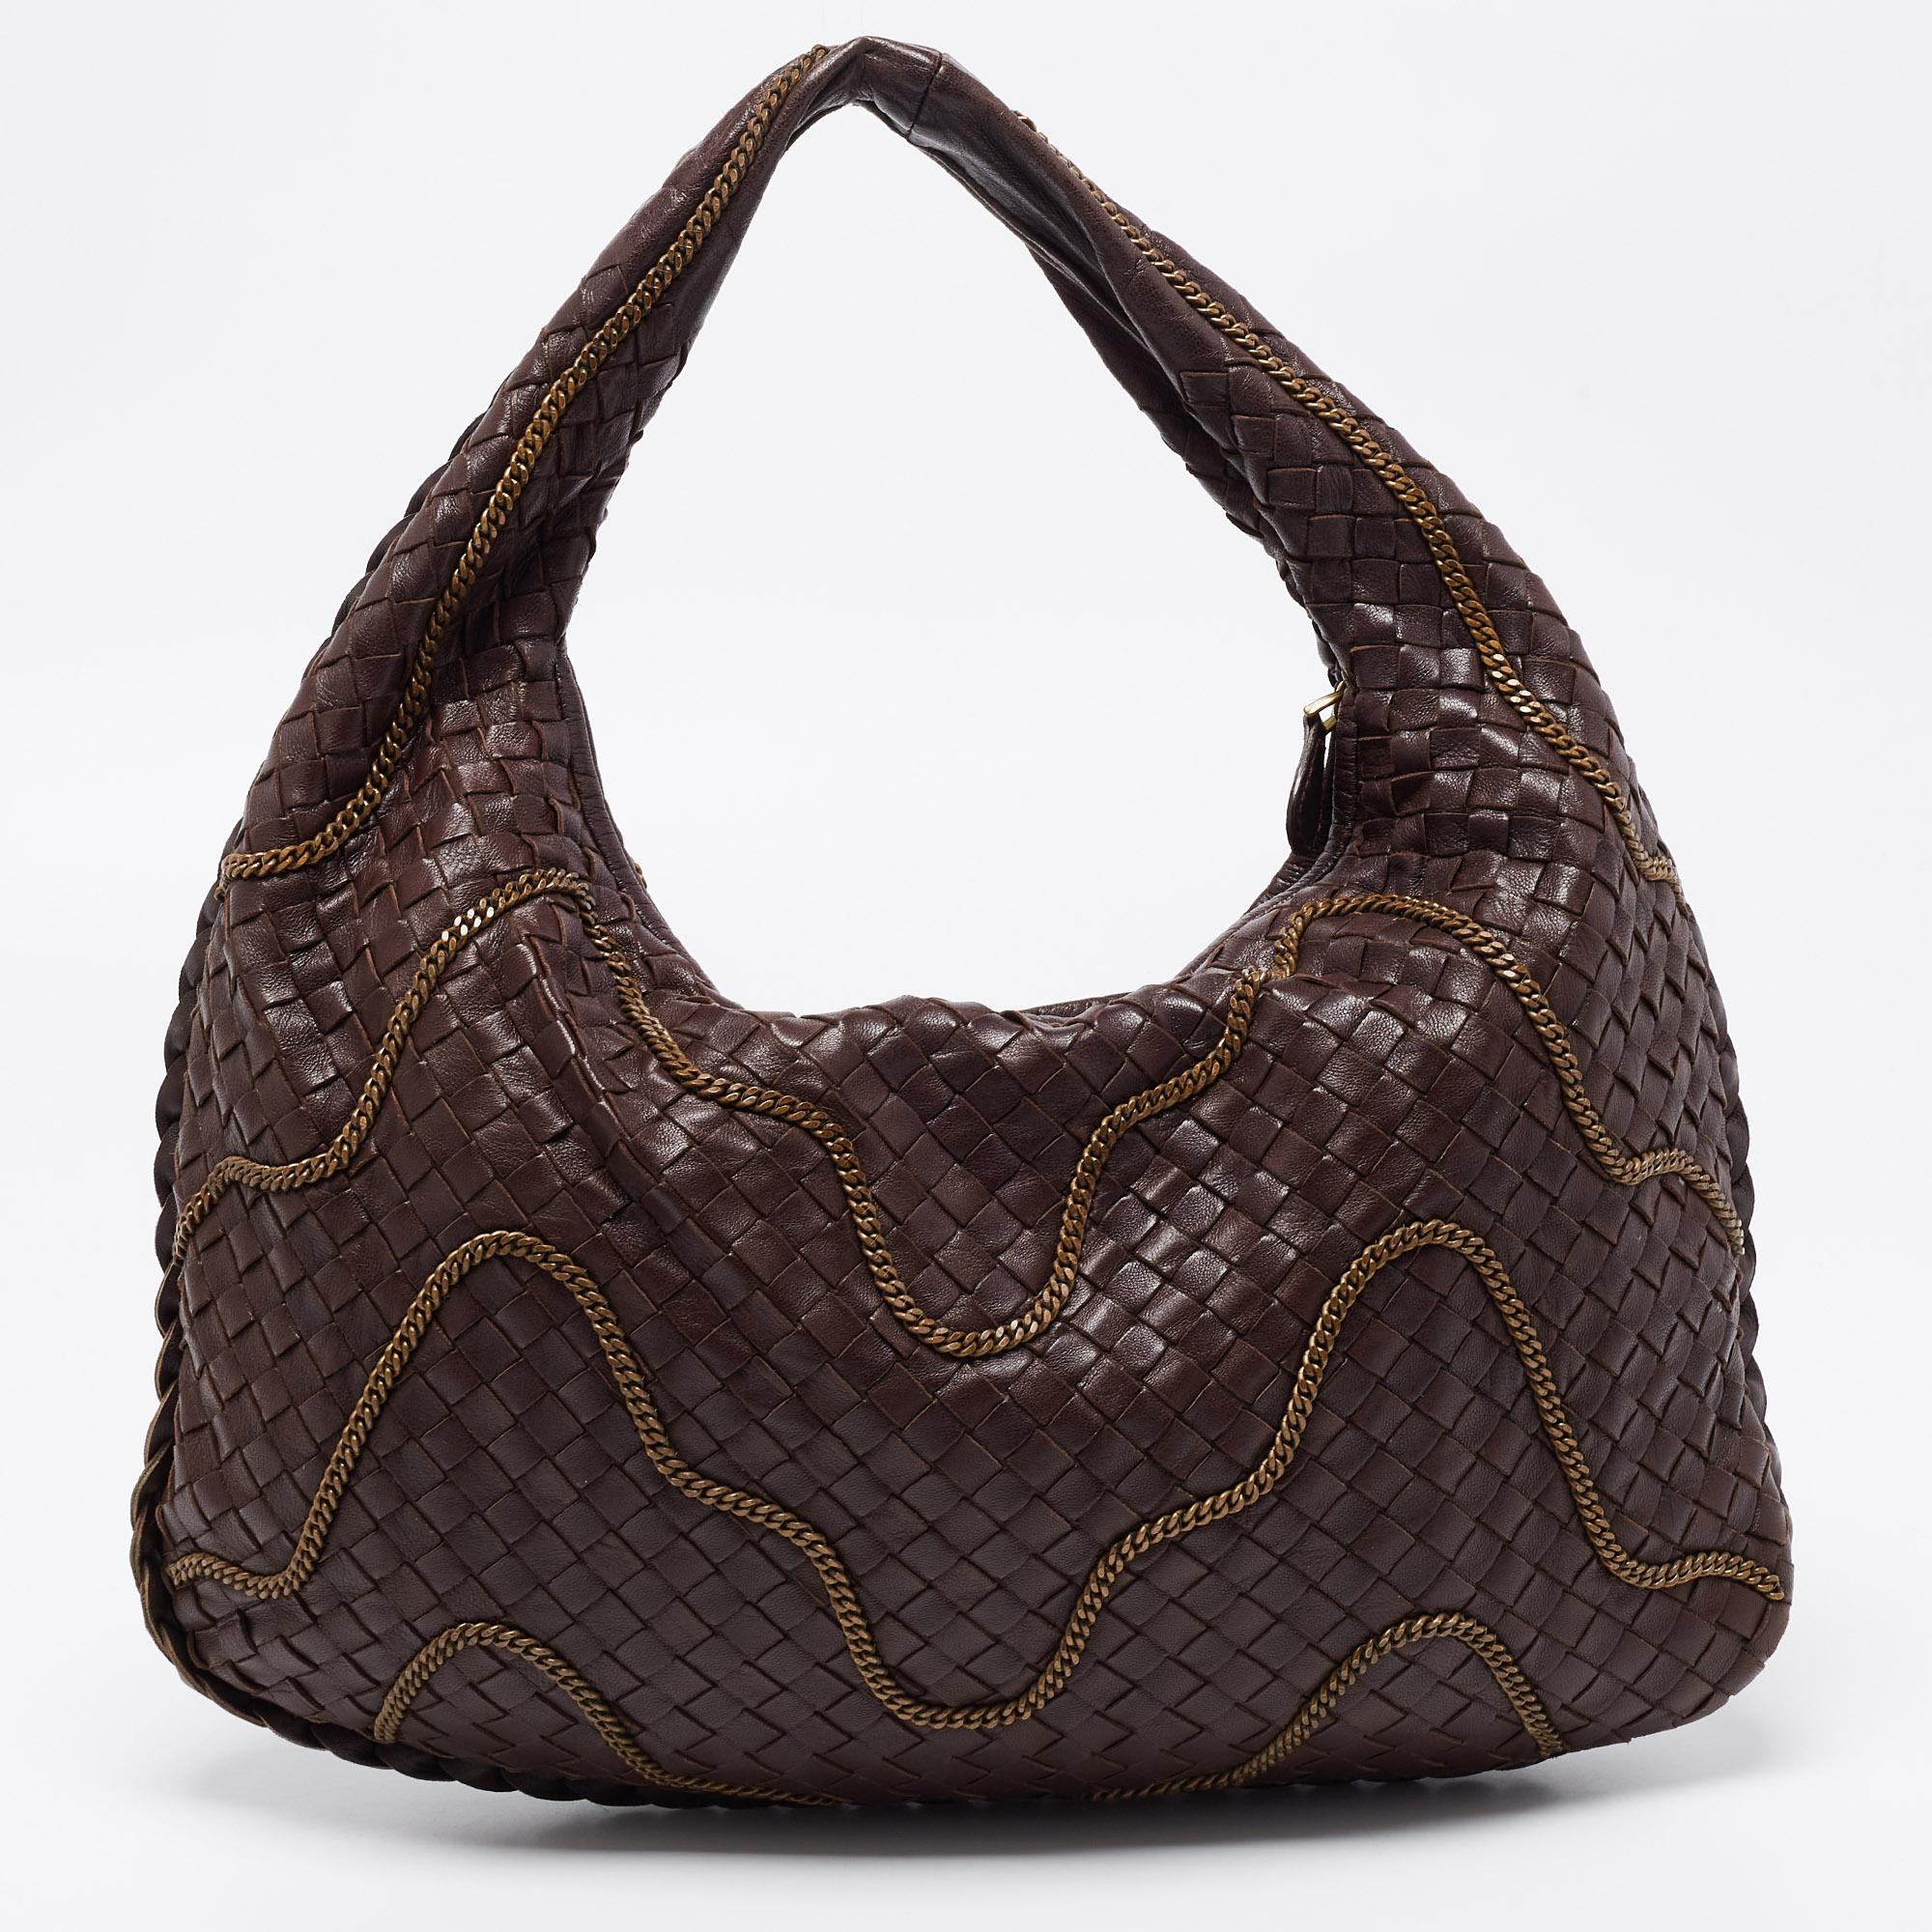 The excellent craftsmanship of this Bottega Veneta hobo ensures a brilliant finish and a rich appeal. Woven from leather in their signature Intrecciato pattern, the brown-hued bag is embellished with bronze-tone chains. It features a loop handle and